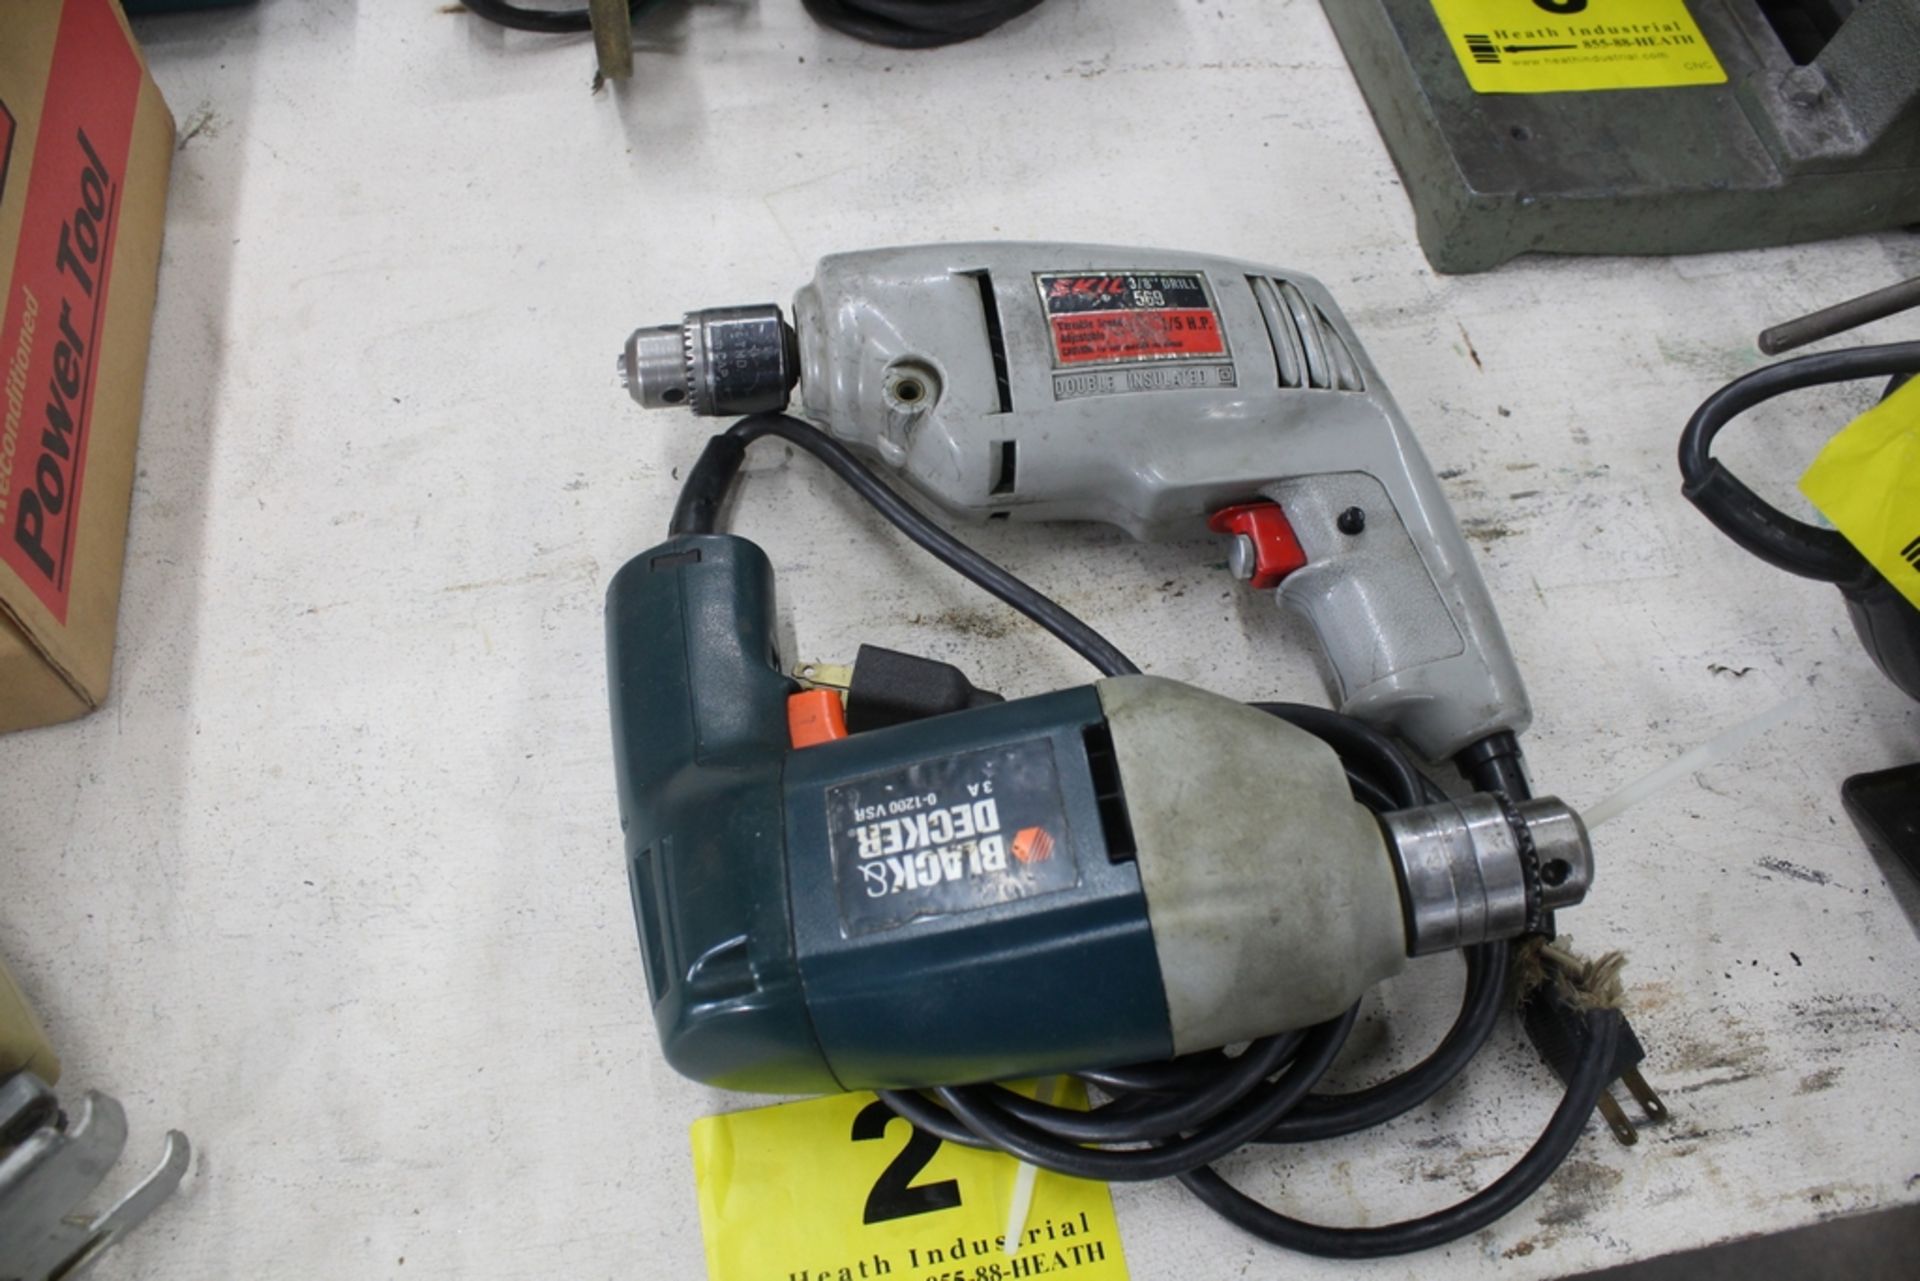 (2) ASSORTED ELECTRIC DRILLS